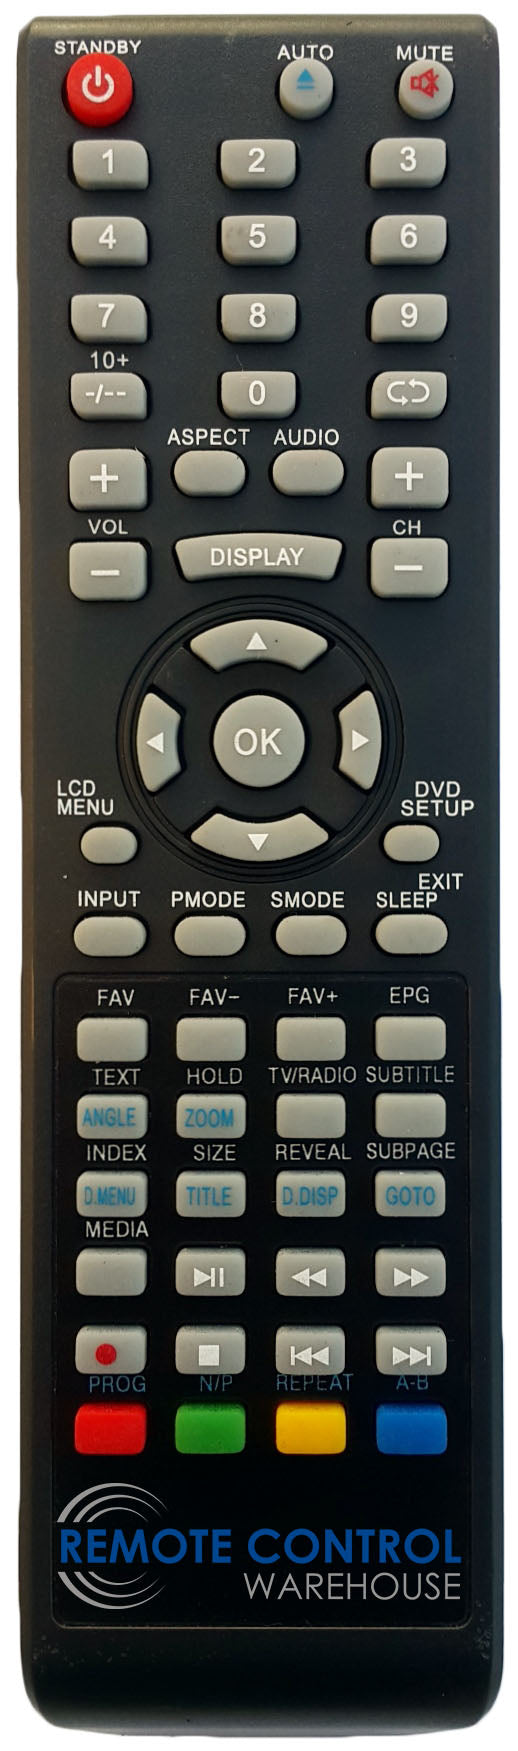 TECO LED22IFRK LCD TV REPLACEMENT REMOTE CONTROL